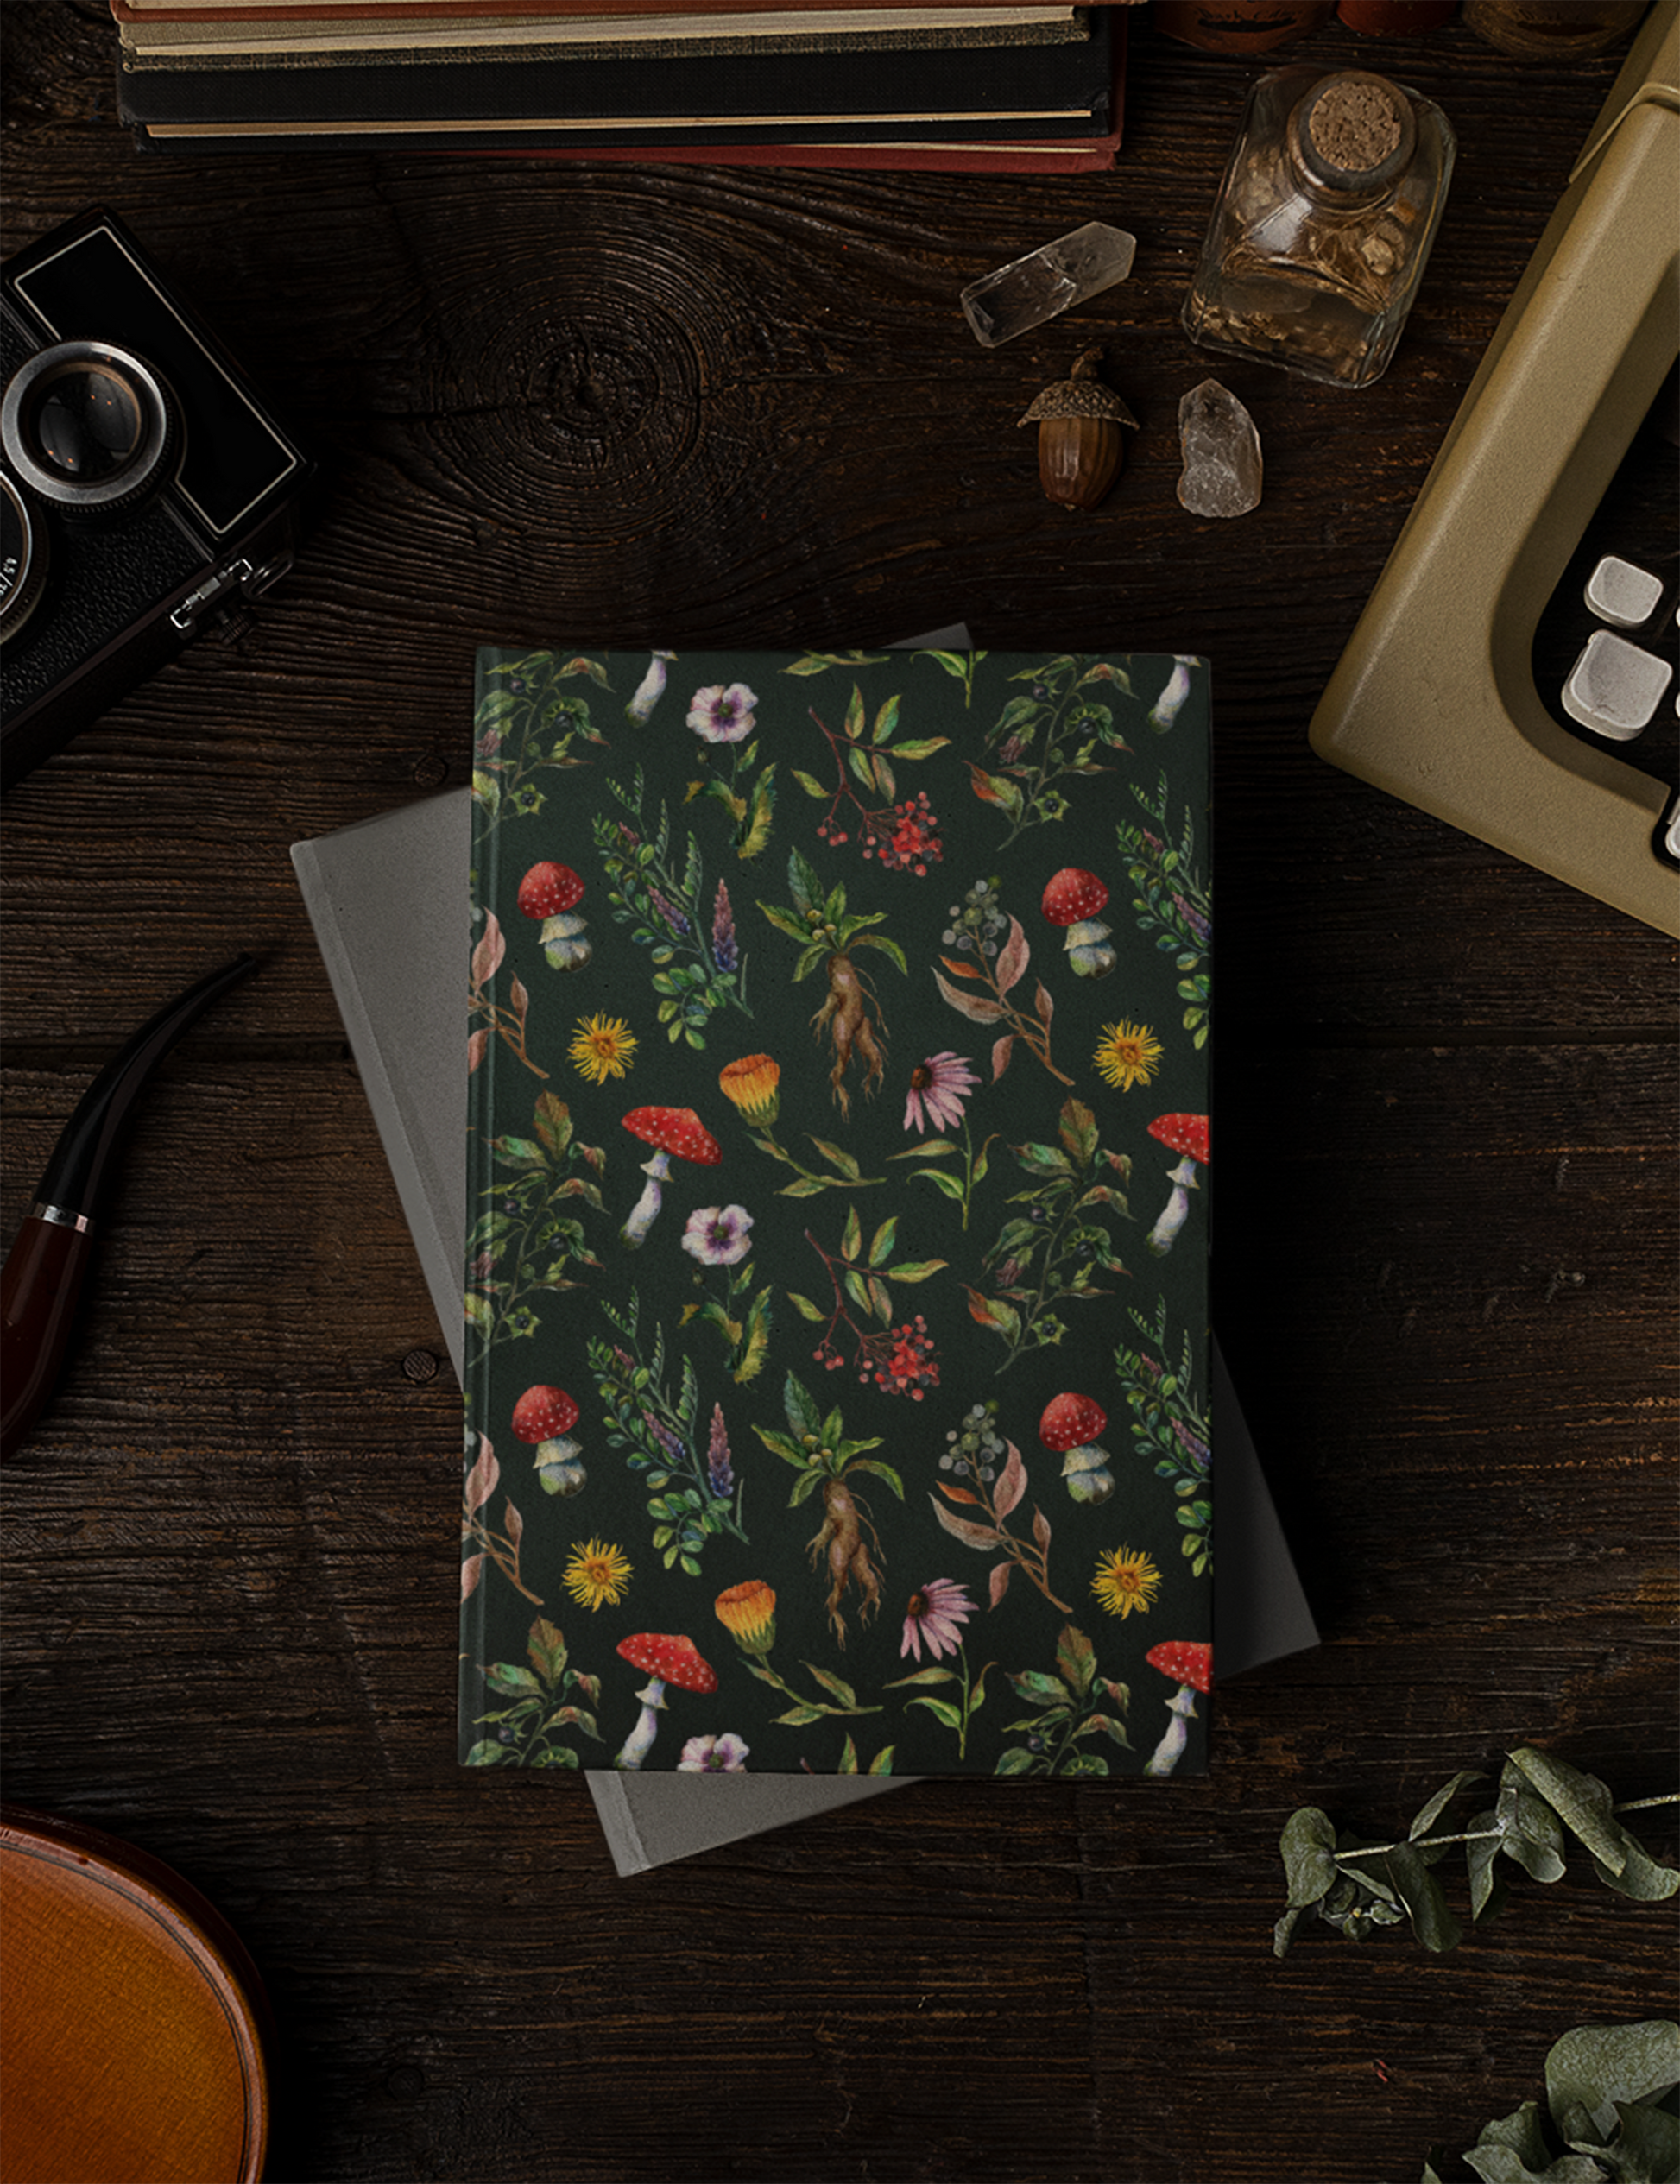 Green Witch Aesthetic Herbology Hardcover Notebook